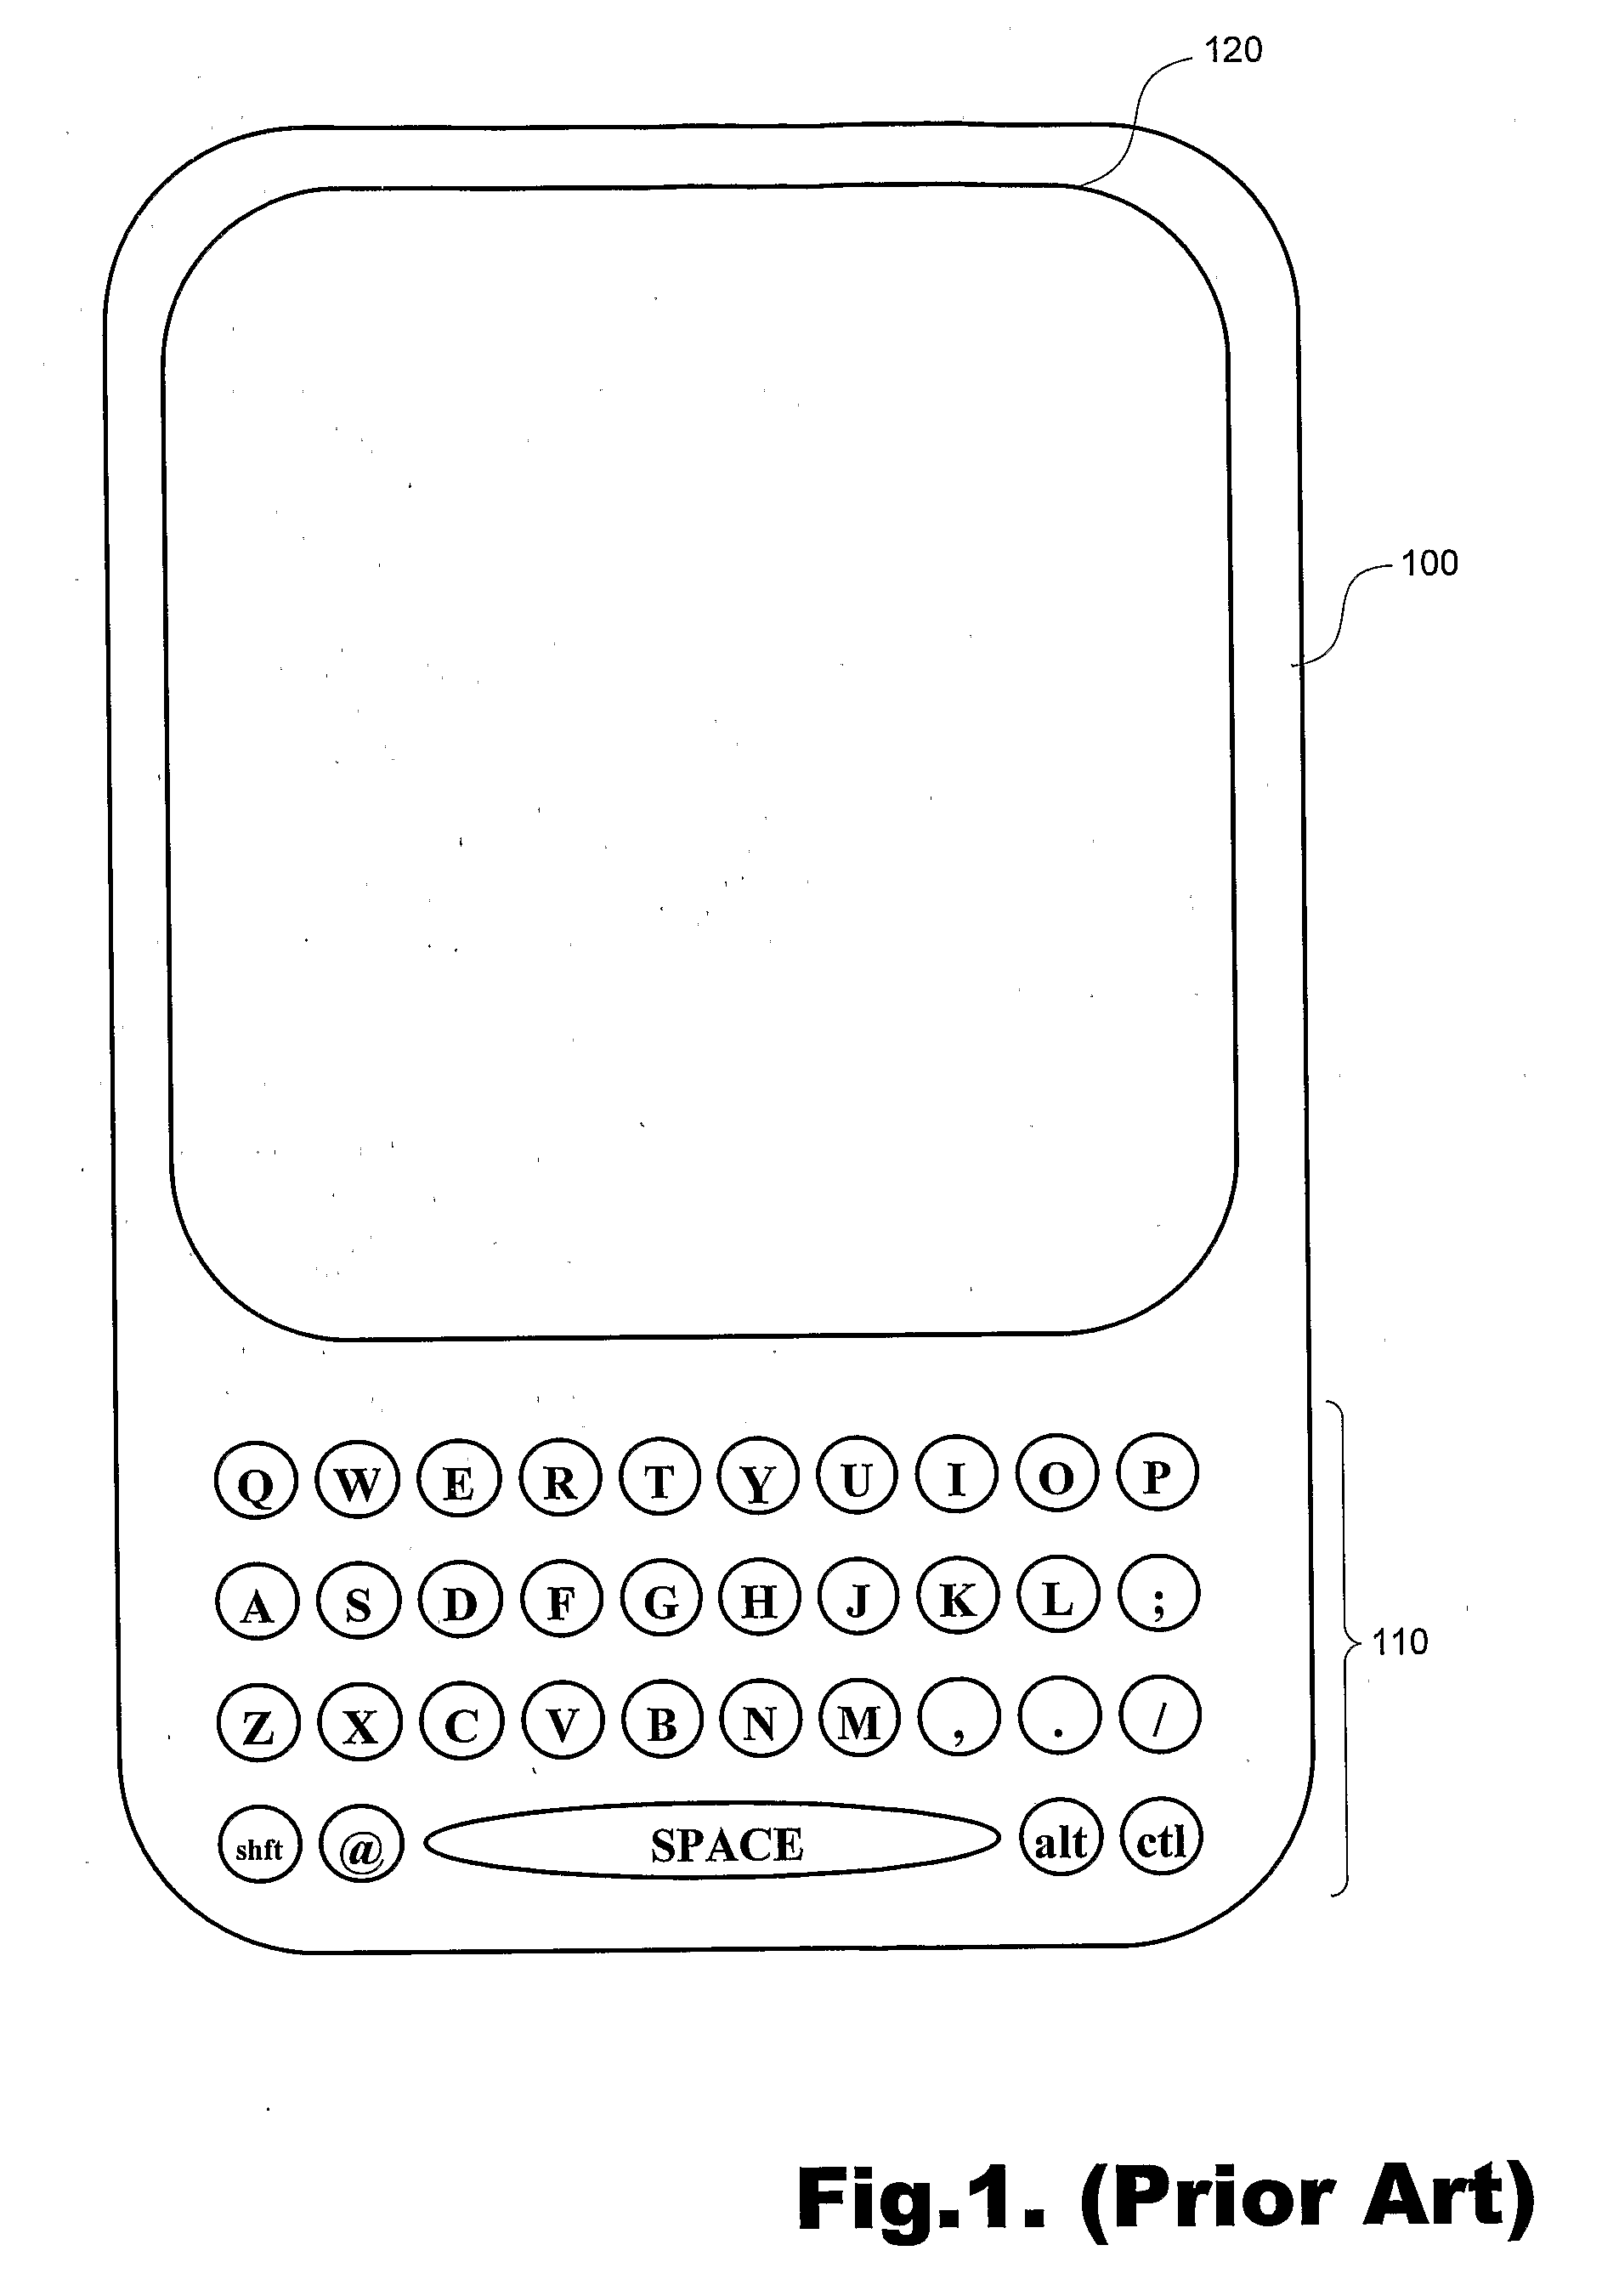 Reduced Keypad For Predictive Input